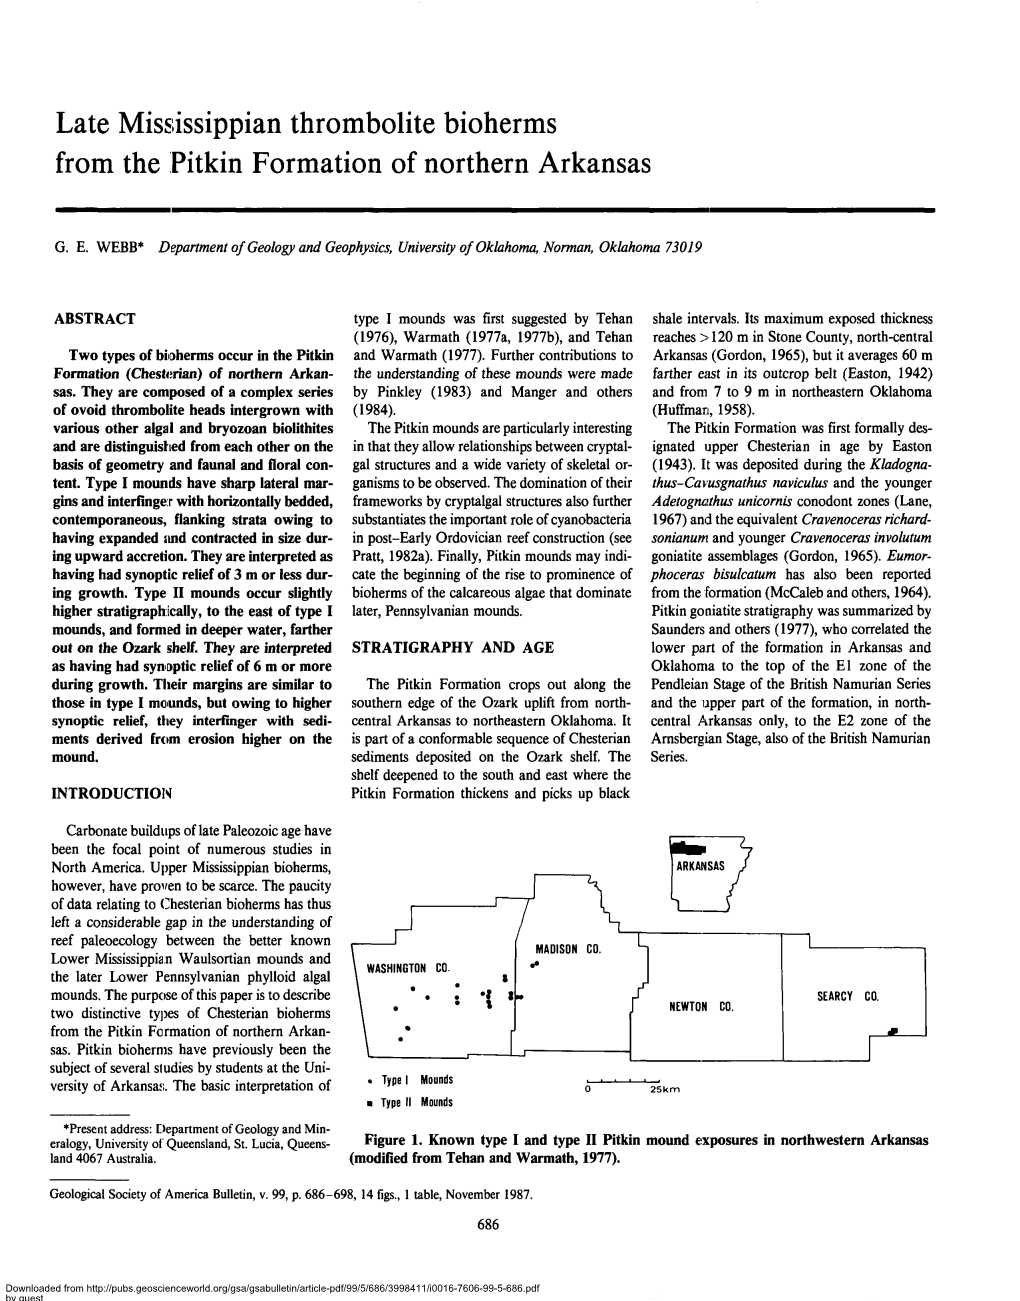 Late Mississippian Thrombolite Bioherms from the Pitkin Formation of Northern Arkansas